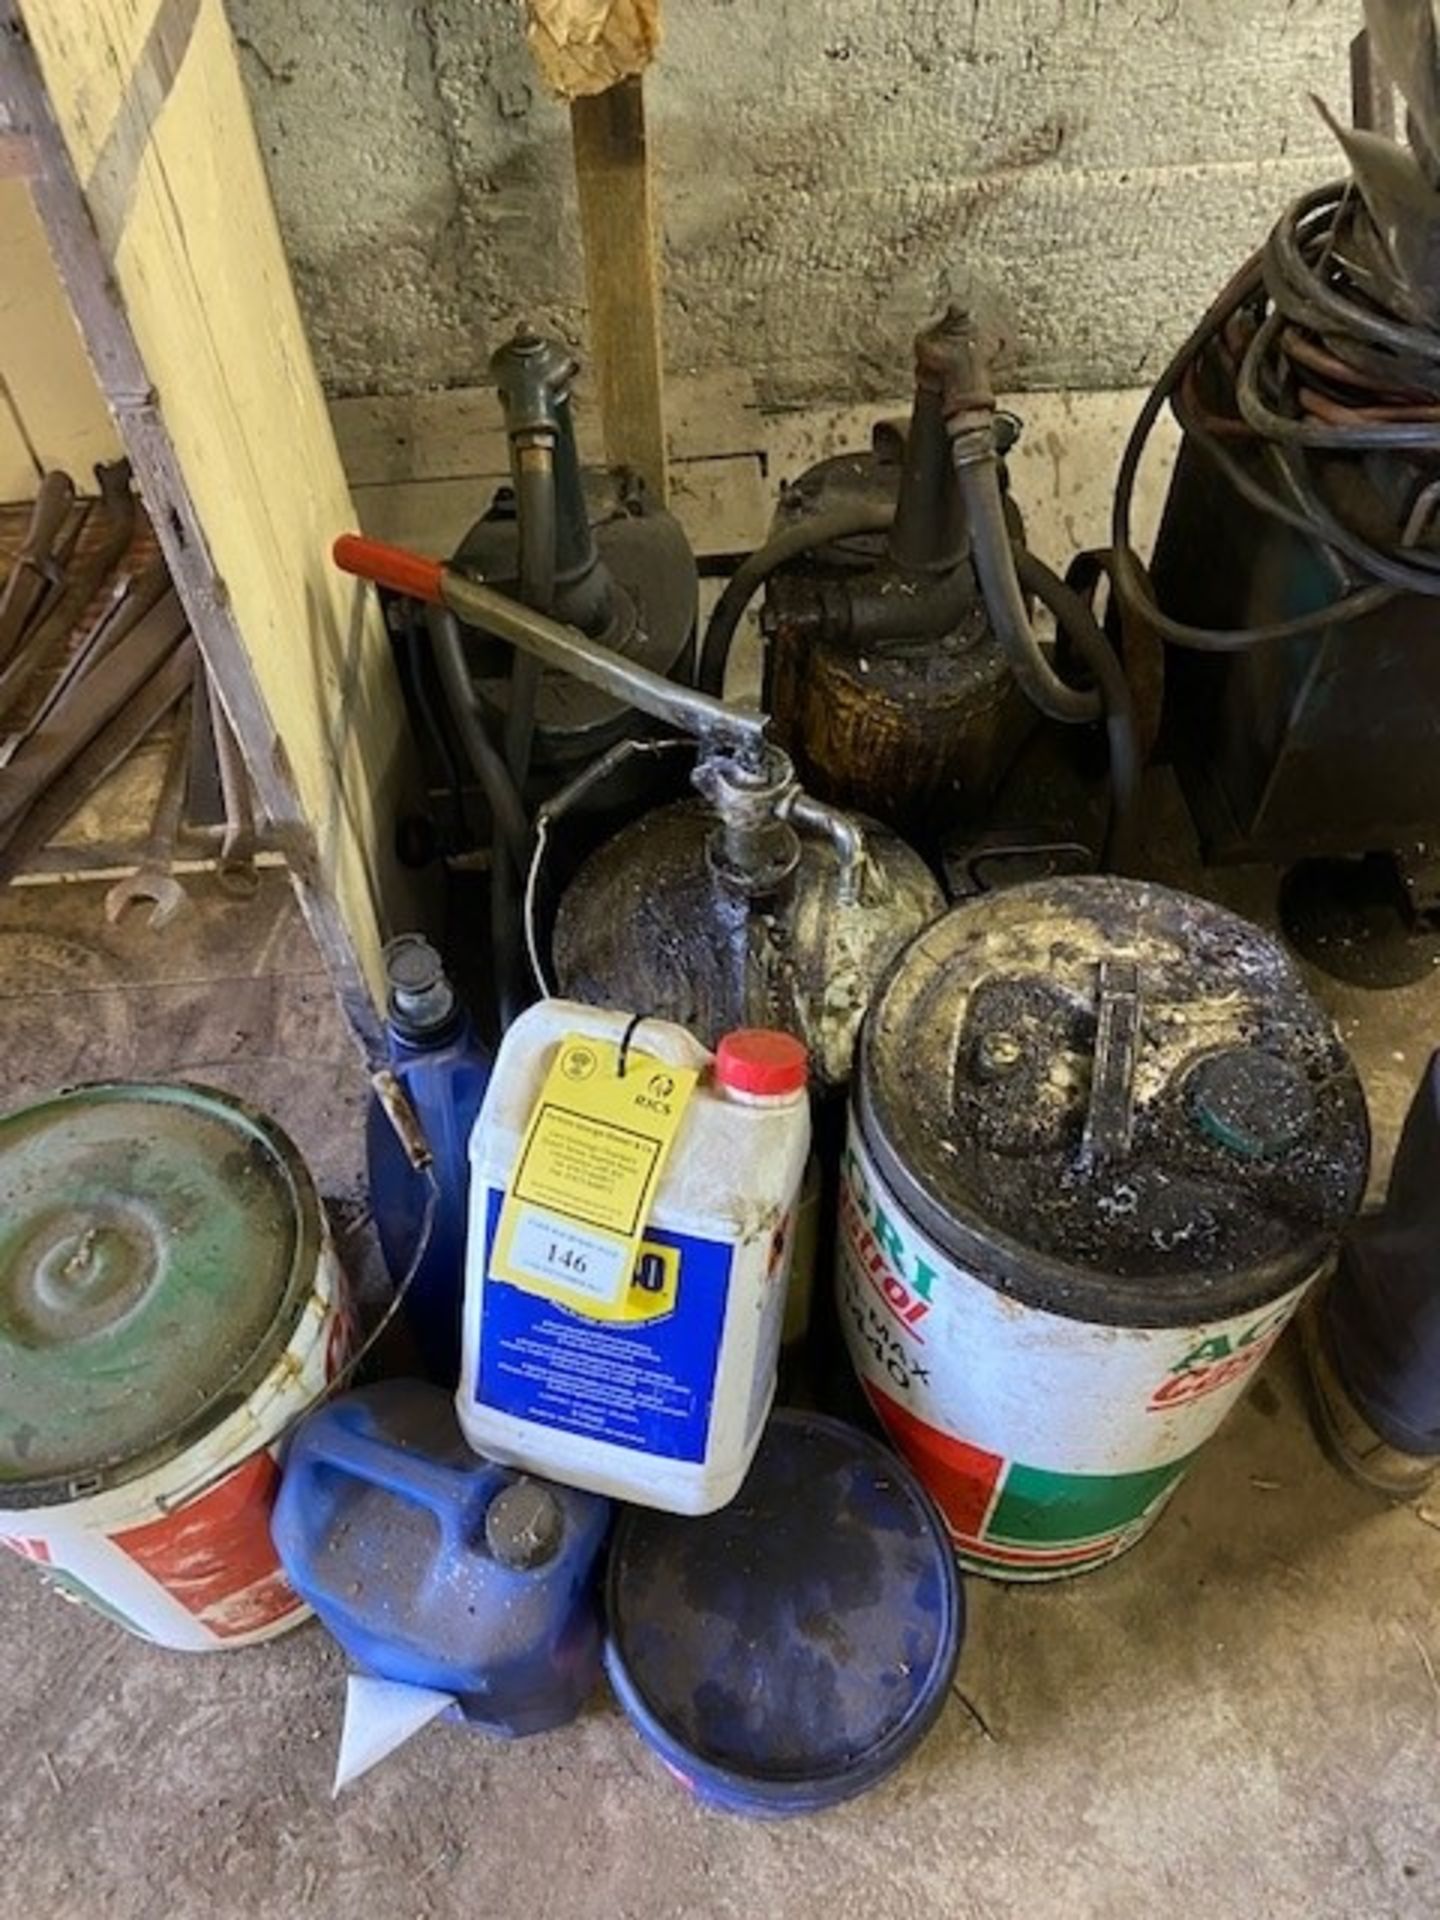 OIL CANS, GREASE BUCKETS ETC.